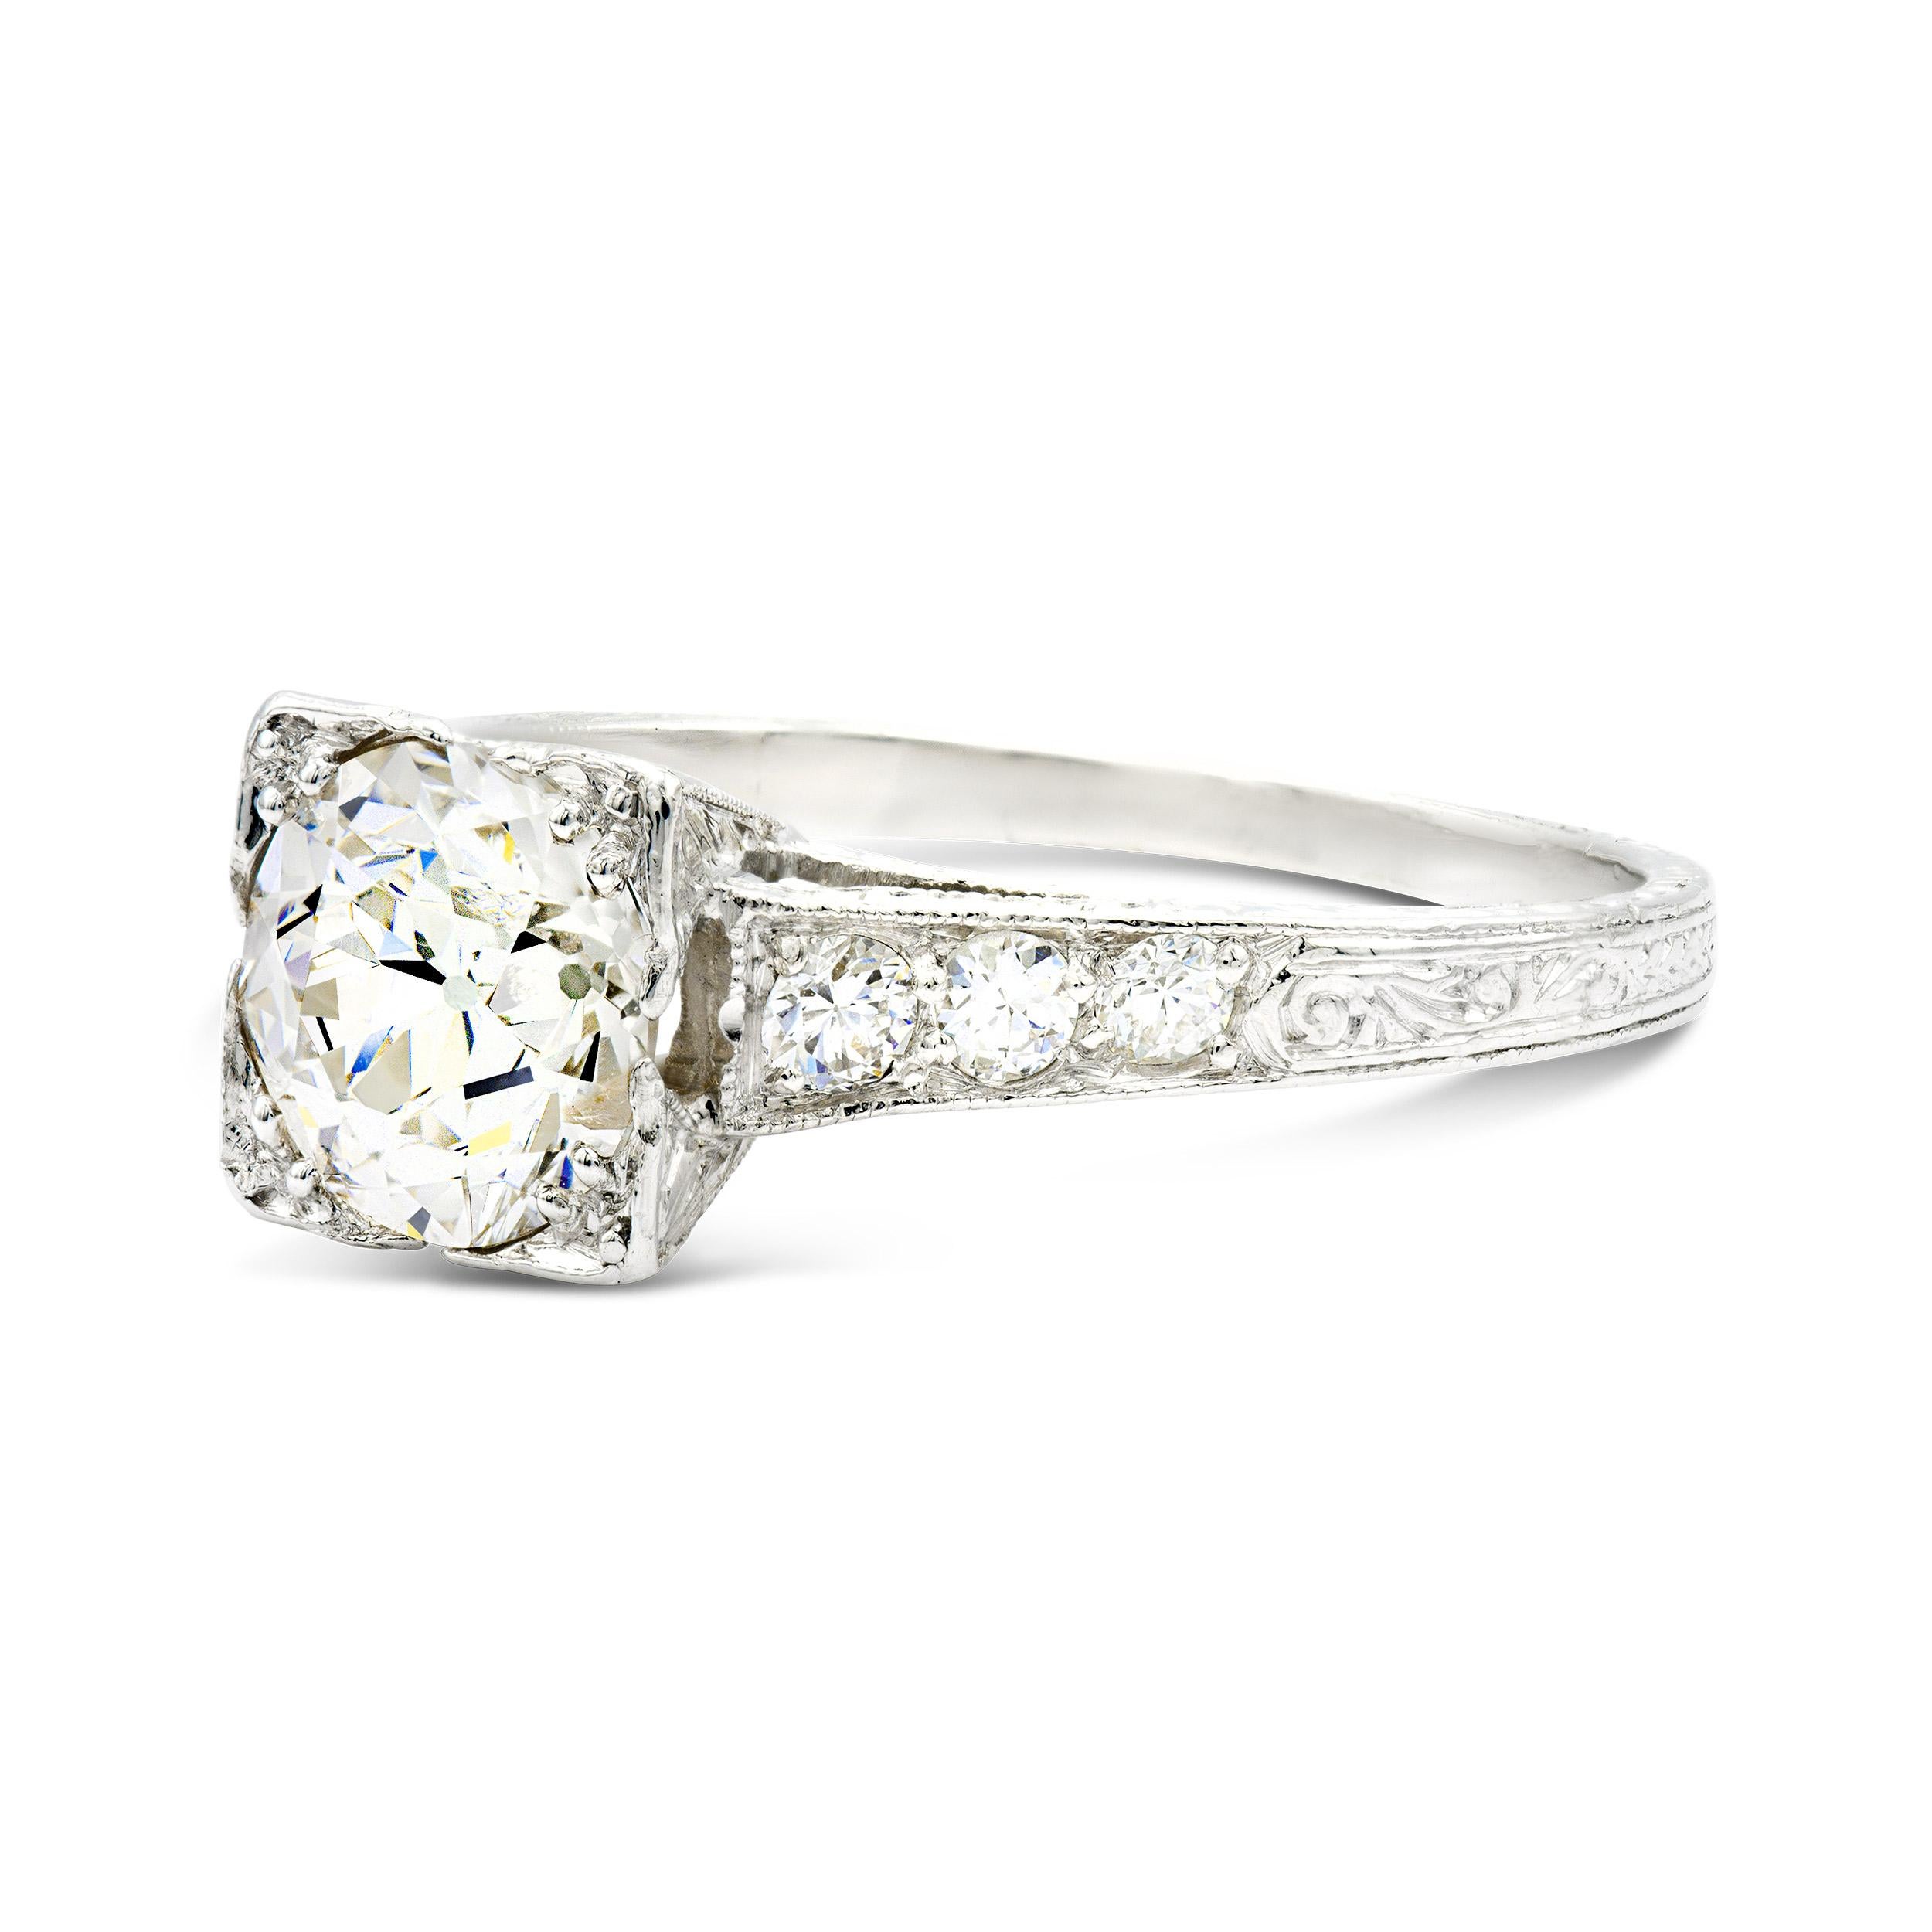 We love the intricate and extensive hand engraved details of this platinum deco engagement ring. Centering this jewel is a 1.29-carat old European cut diamond with a large culet and tons of sparkle. The artisanship of this piece and classic design